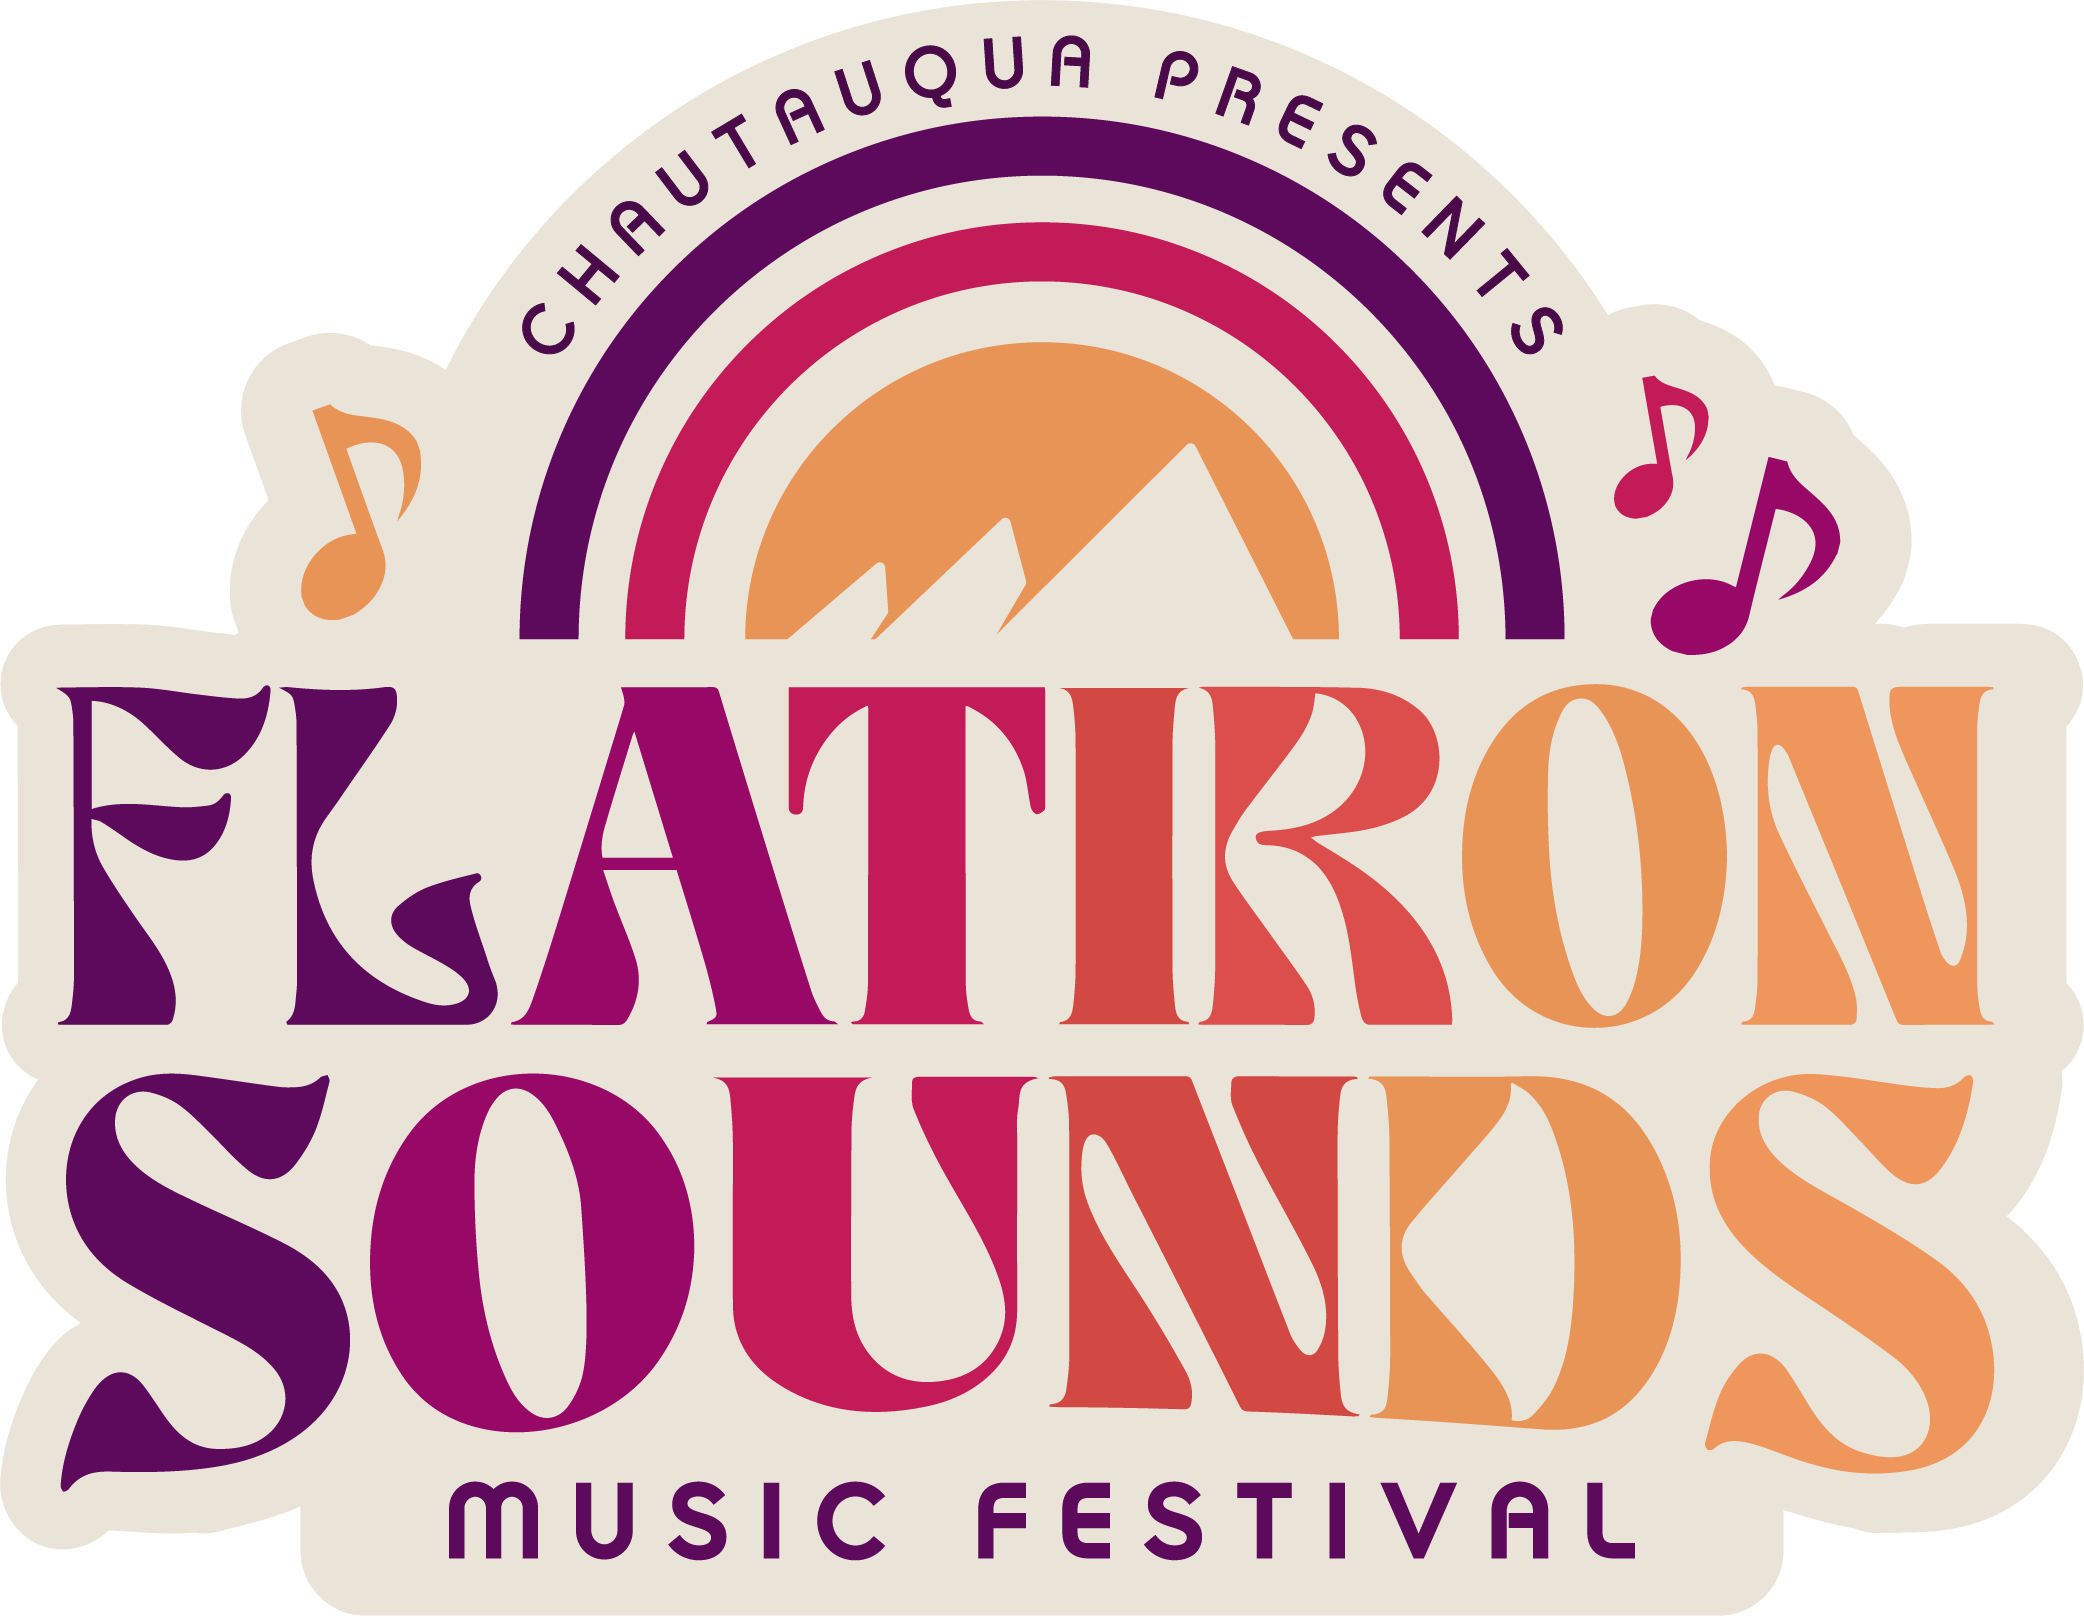 Flatiron Sounds Music Festival - An Unmissable Day of Music, Food, and Fun at Chautauqua Park